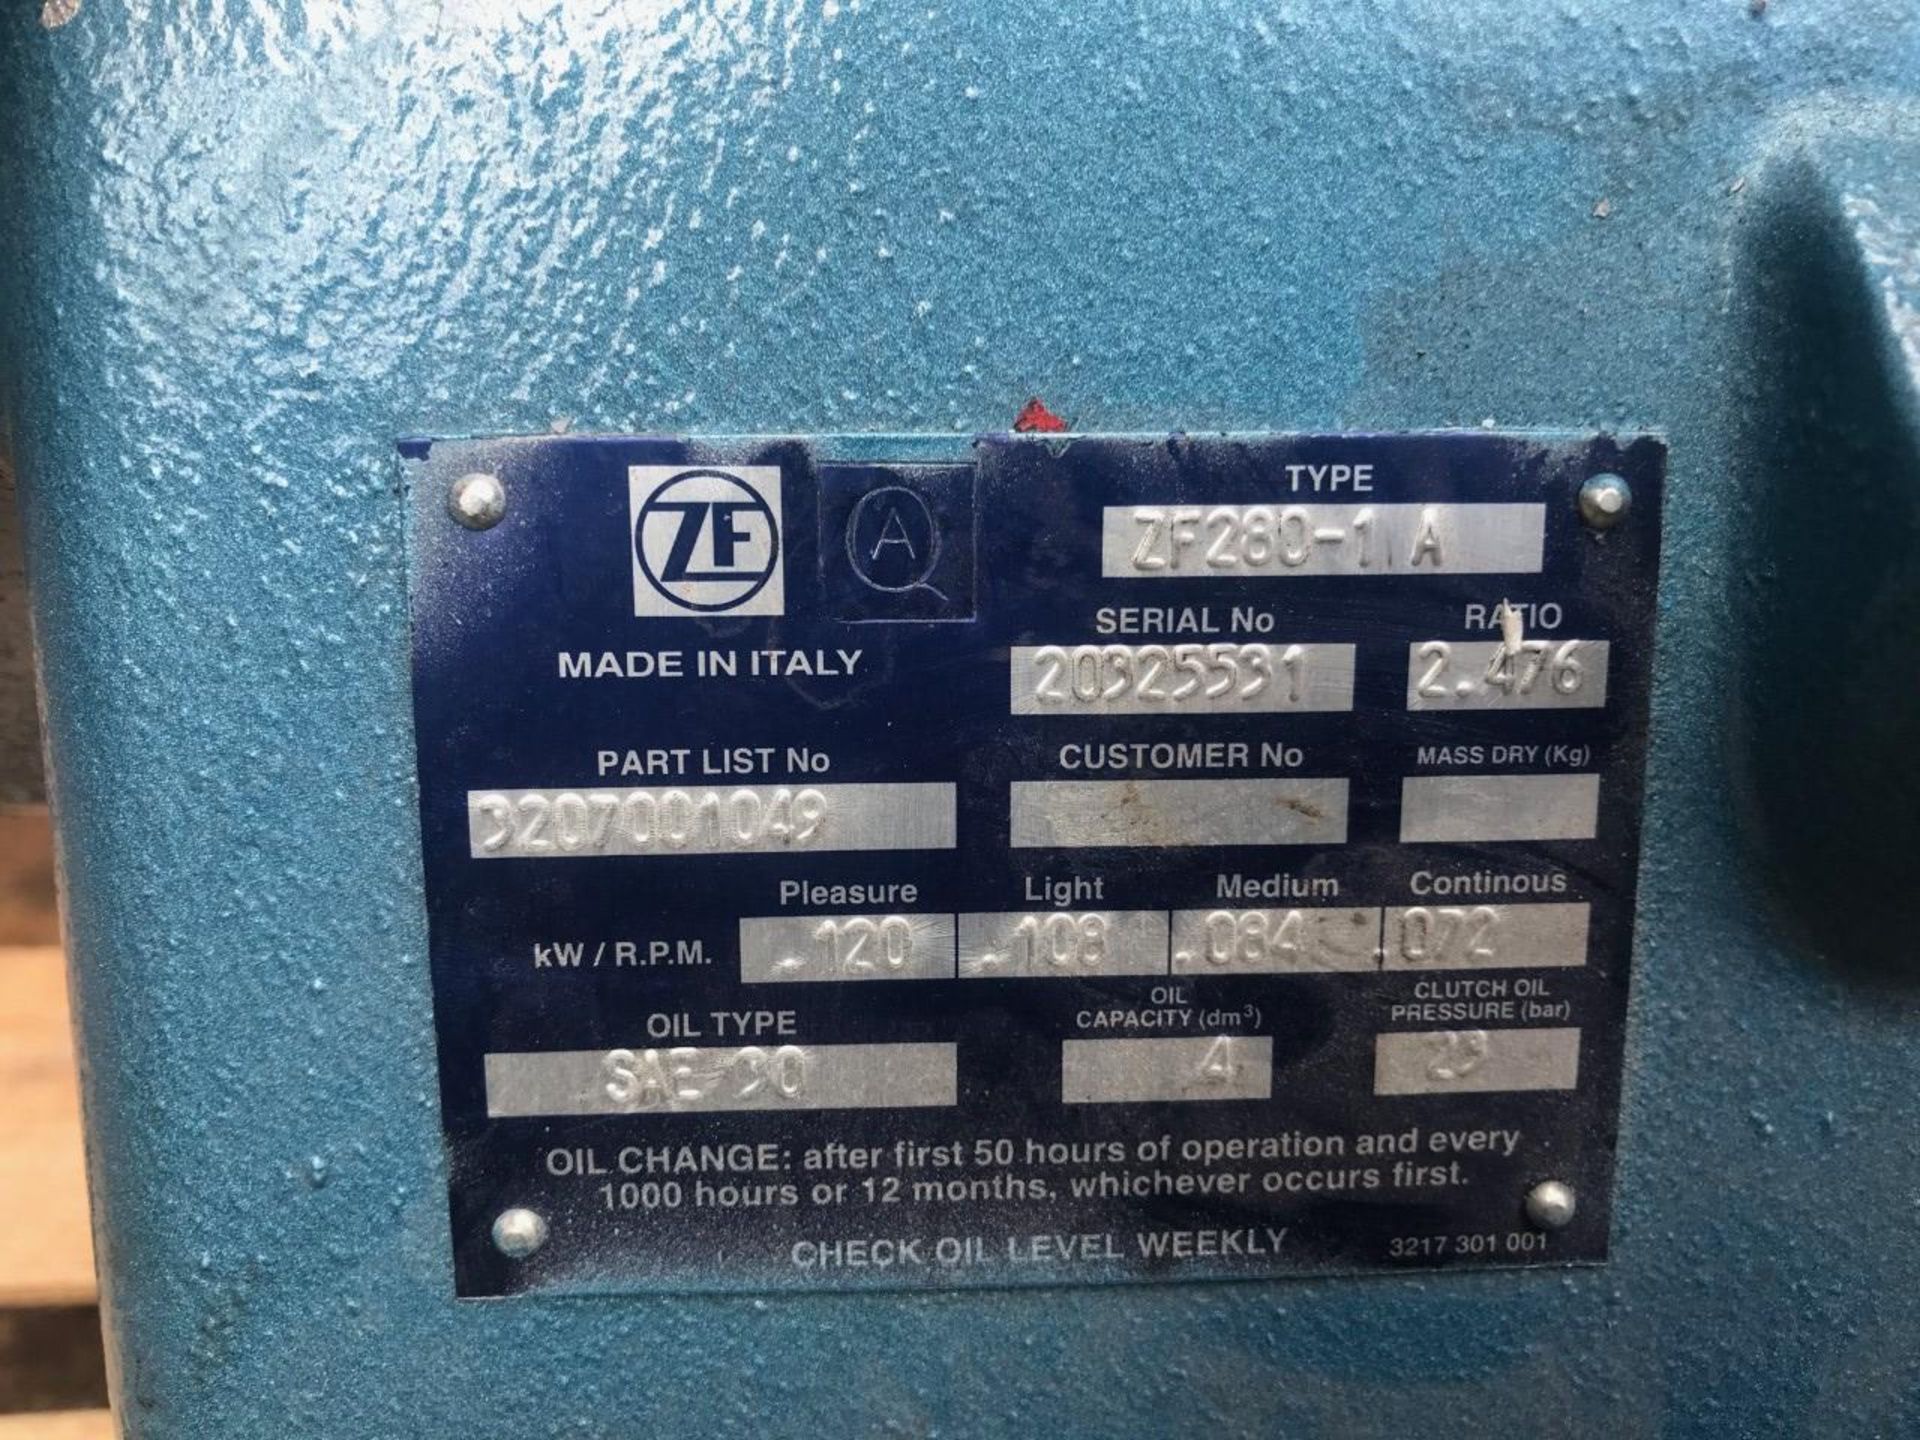 ZF 280 1A Ratio 2.476:1 Marine Gearbox - Image 5 of 5